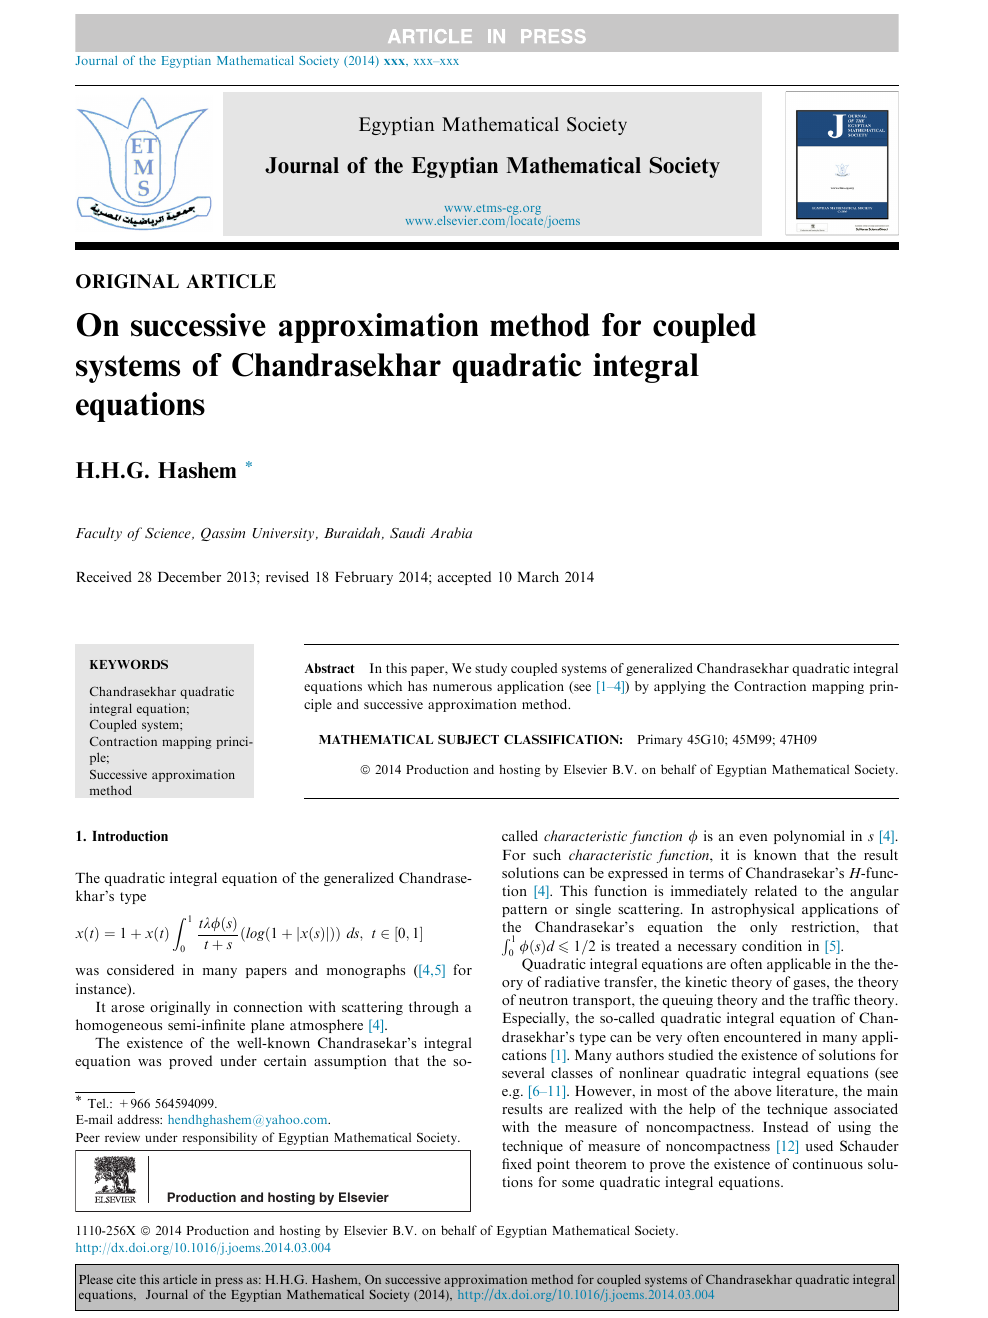 On Successive Approximation Method For Coupled Systems Of Chandrasekhar Quadratic Integral Equations Topic Of Research Paper In Mathematics Download Scholarly Article Pdf And Read For Free On Cyberleninka Open Science Hub